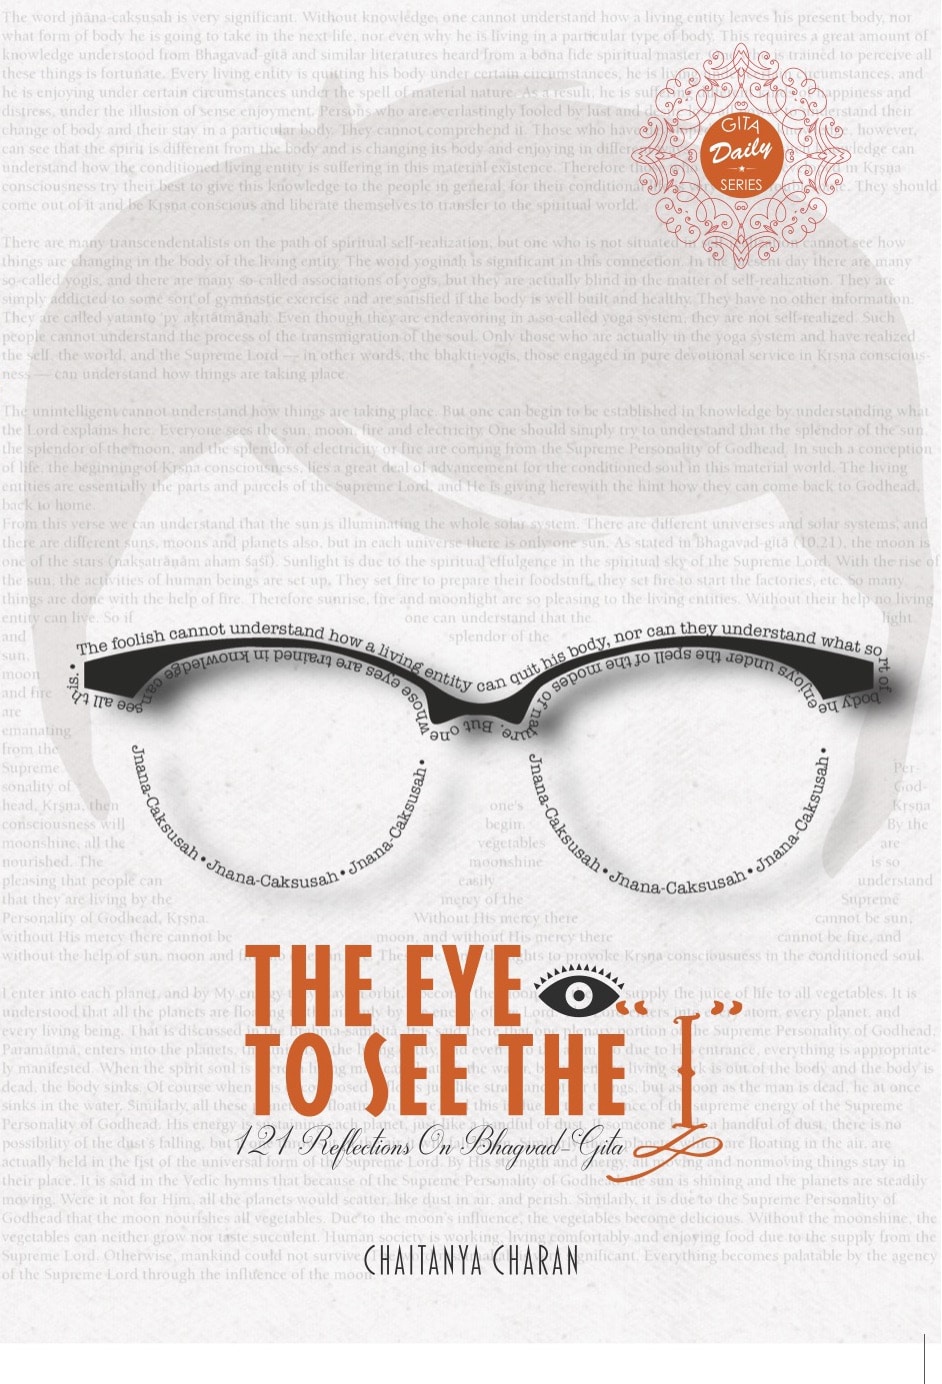 The eye to see the I front cover